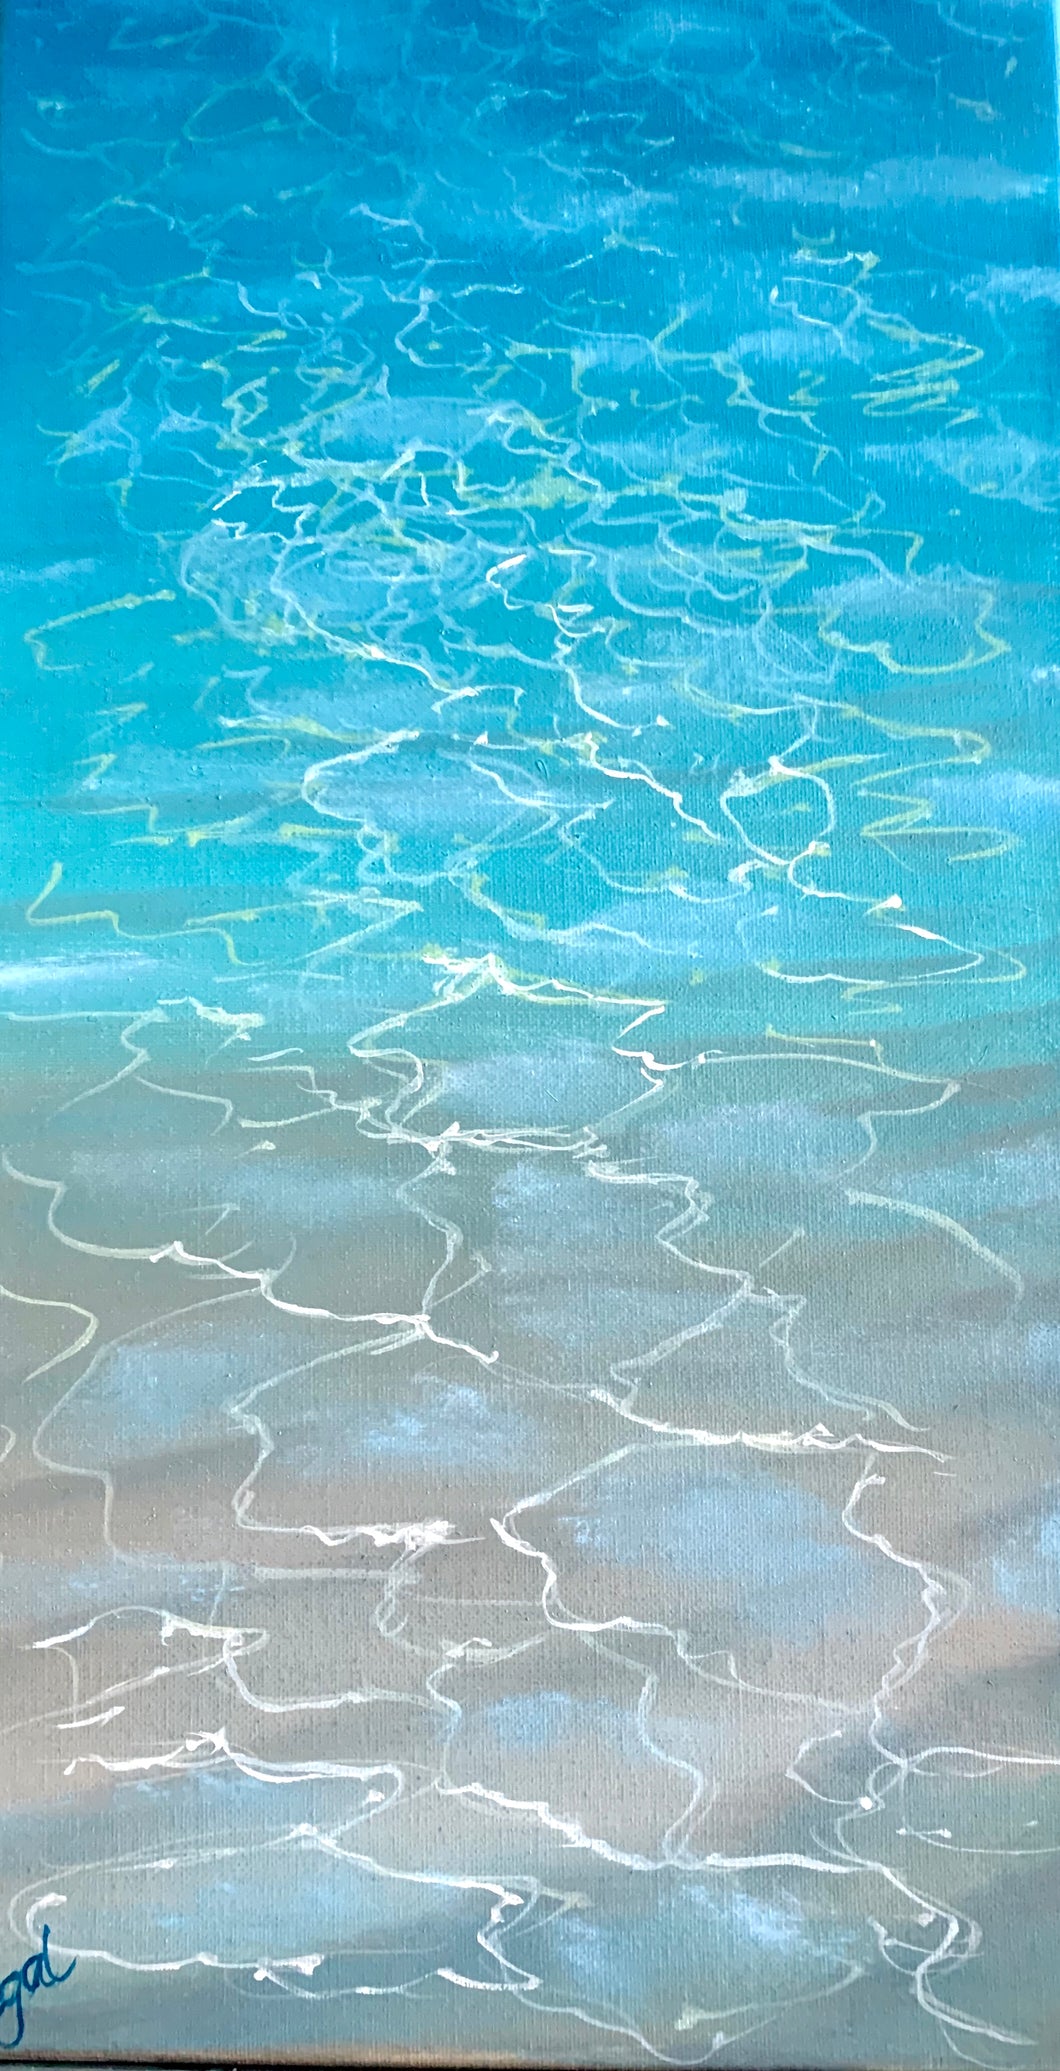 Water Study 1 - 10x20 Oil on Canvas